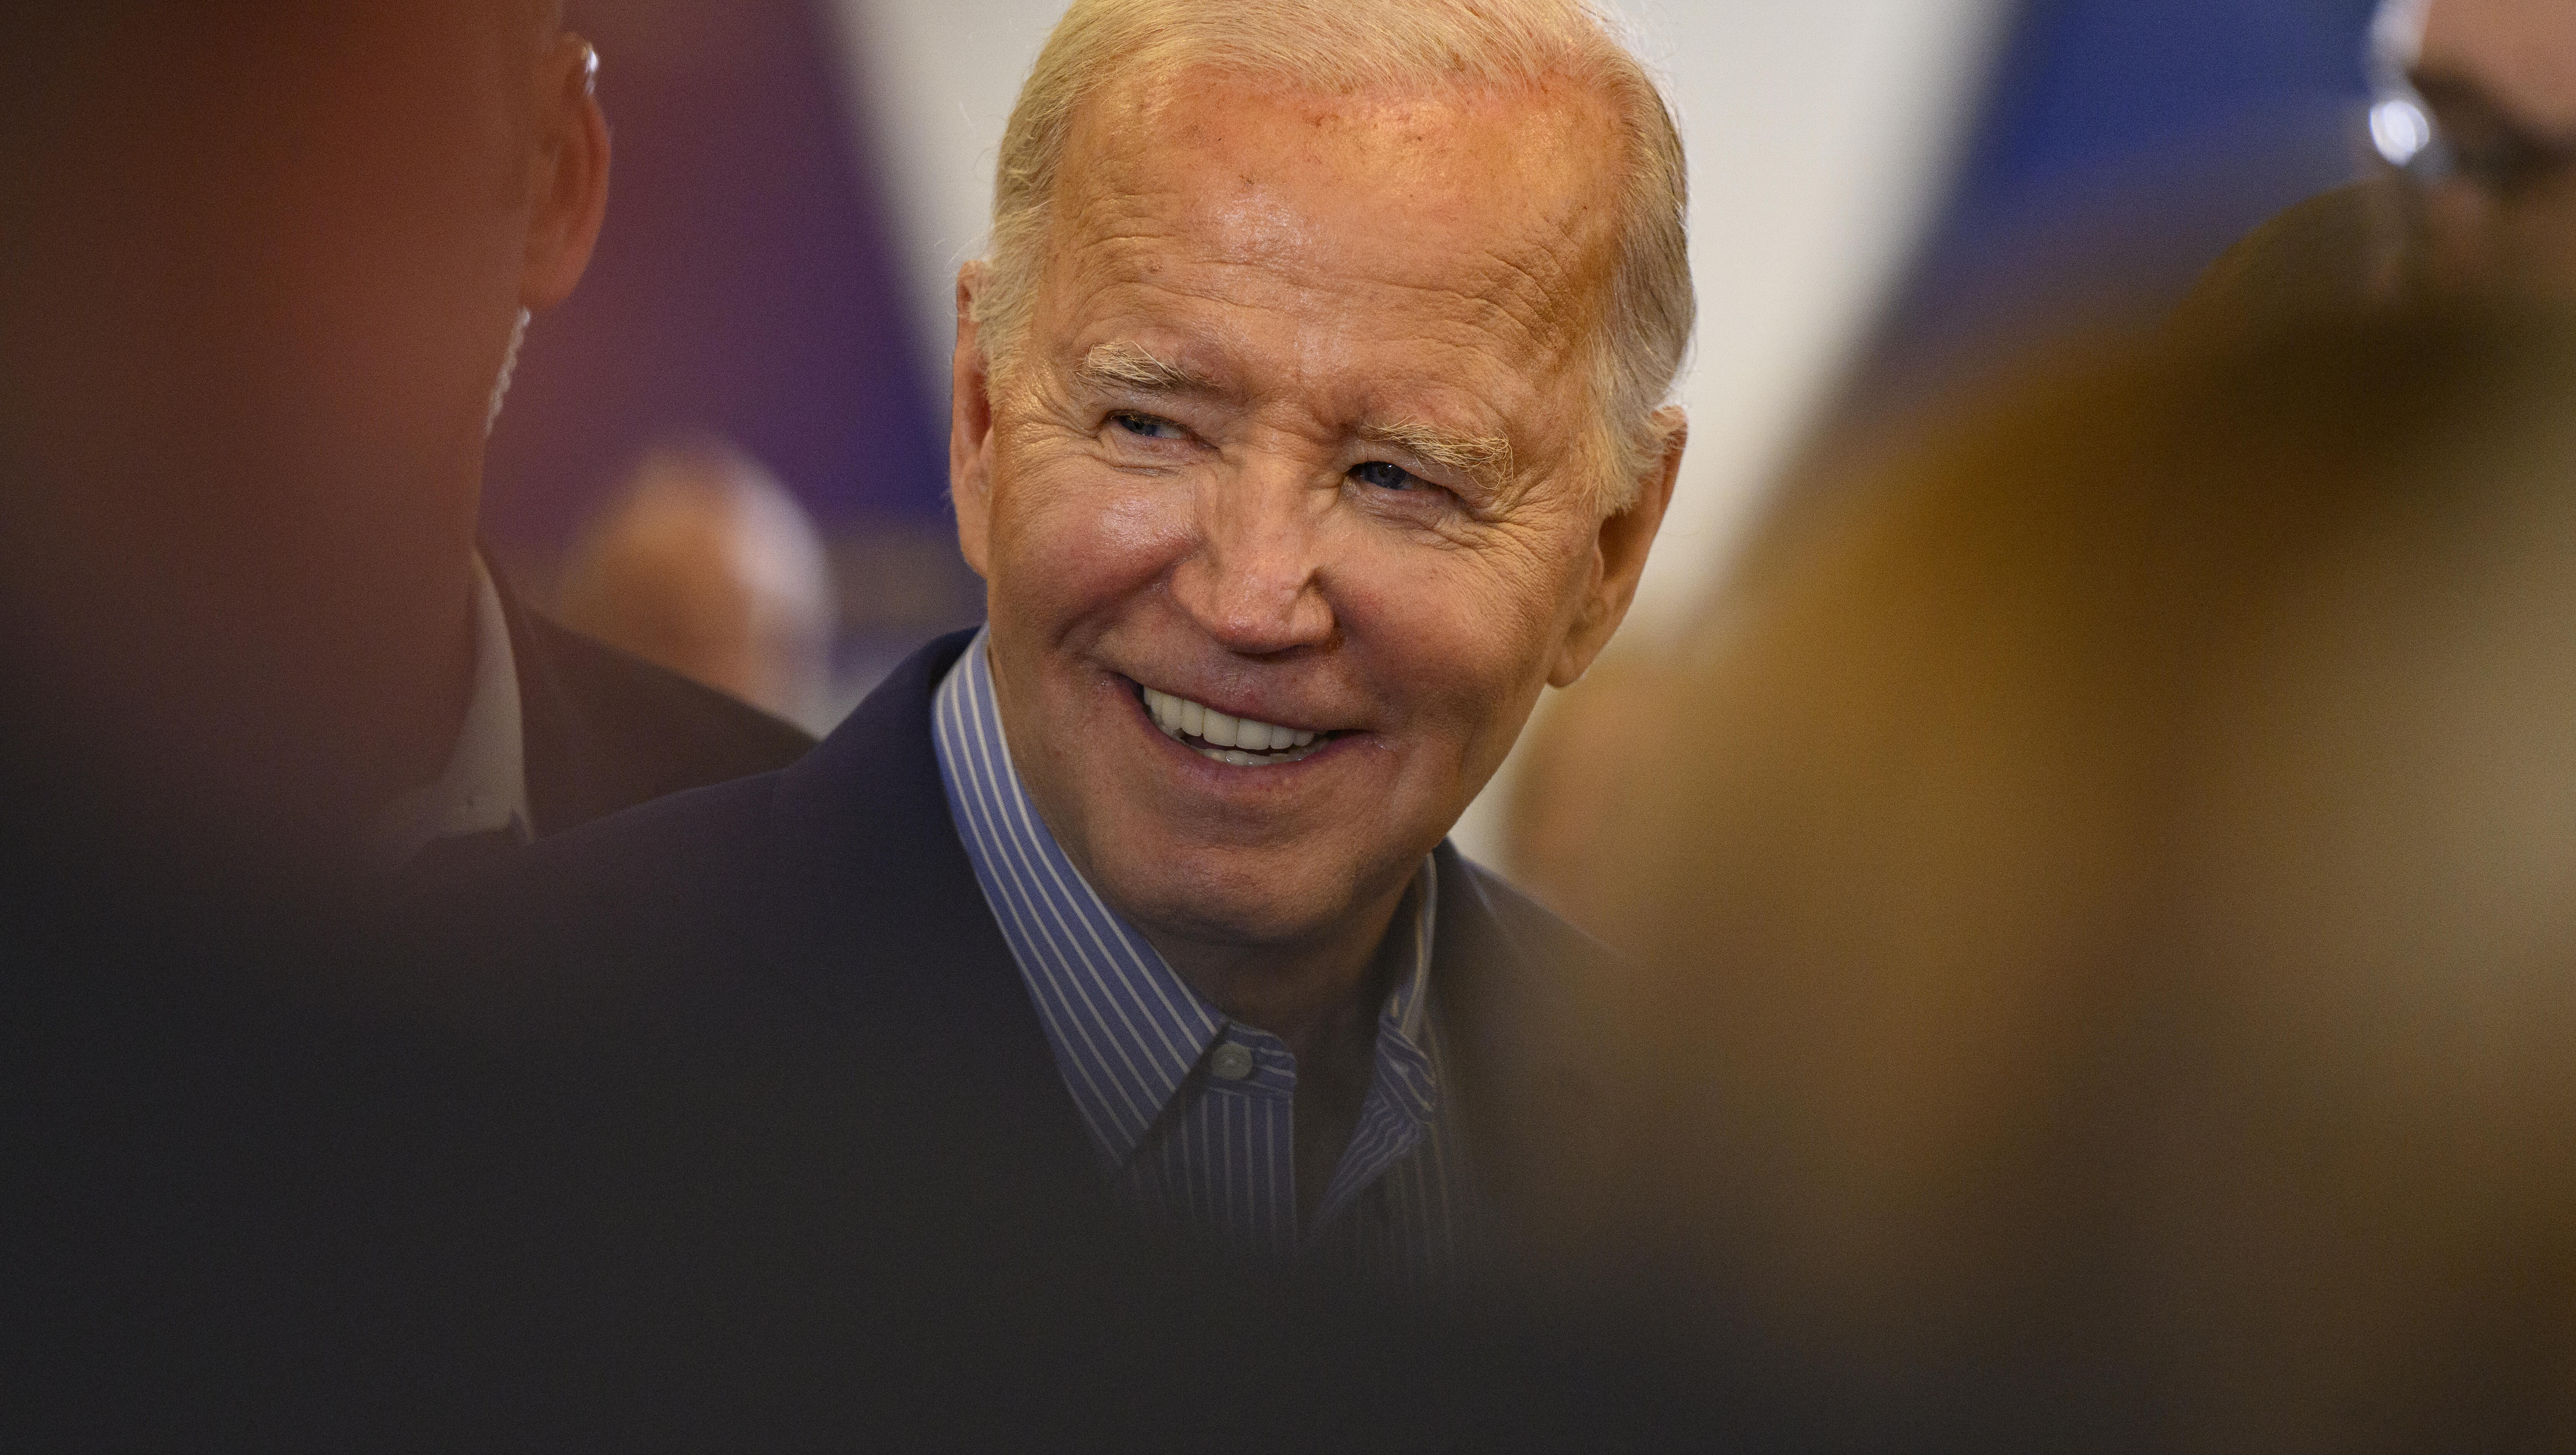 Doug's Blog: The Future Trading Cards for the Characters of Bidens Lies